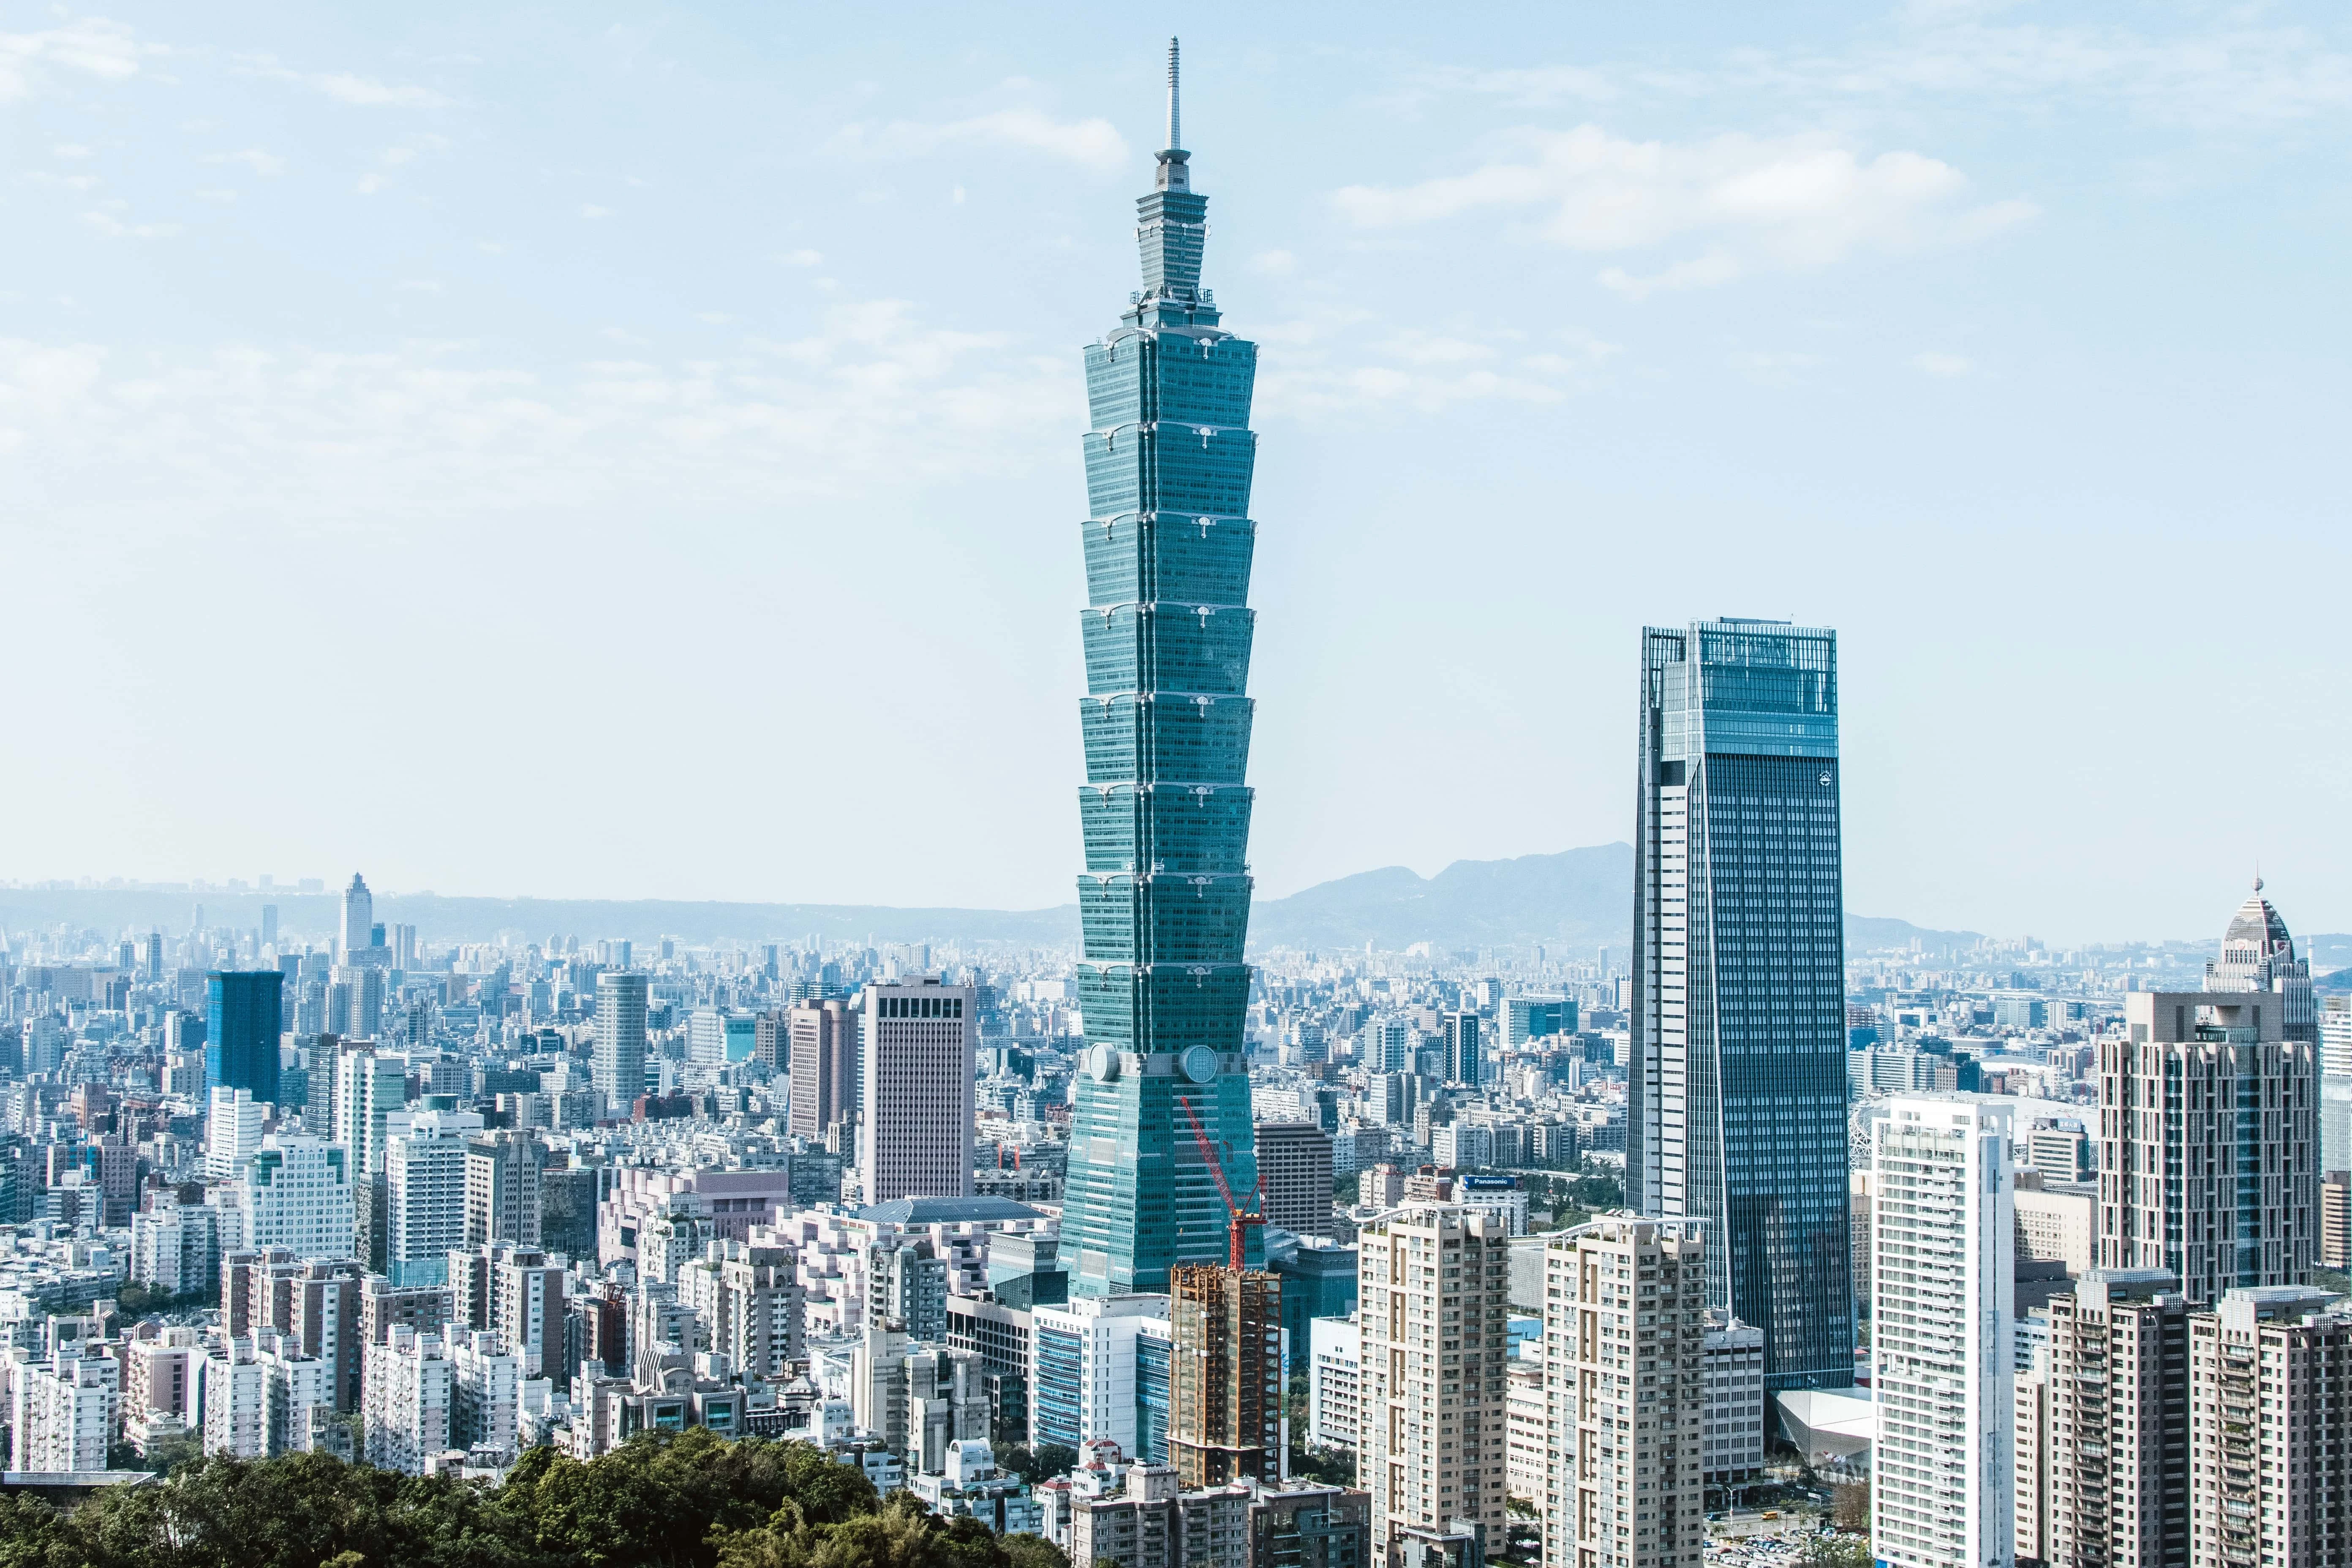 Instagrammable places in Taiwan, Taipei 101